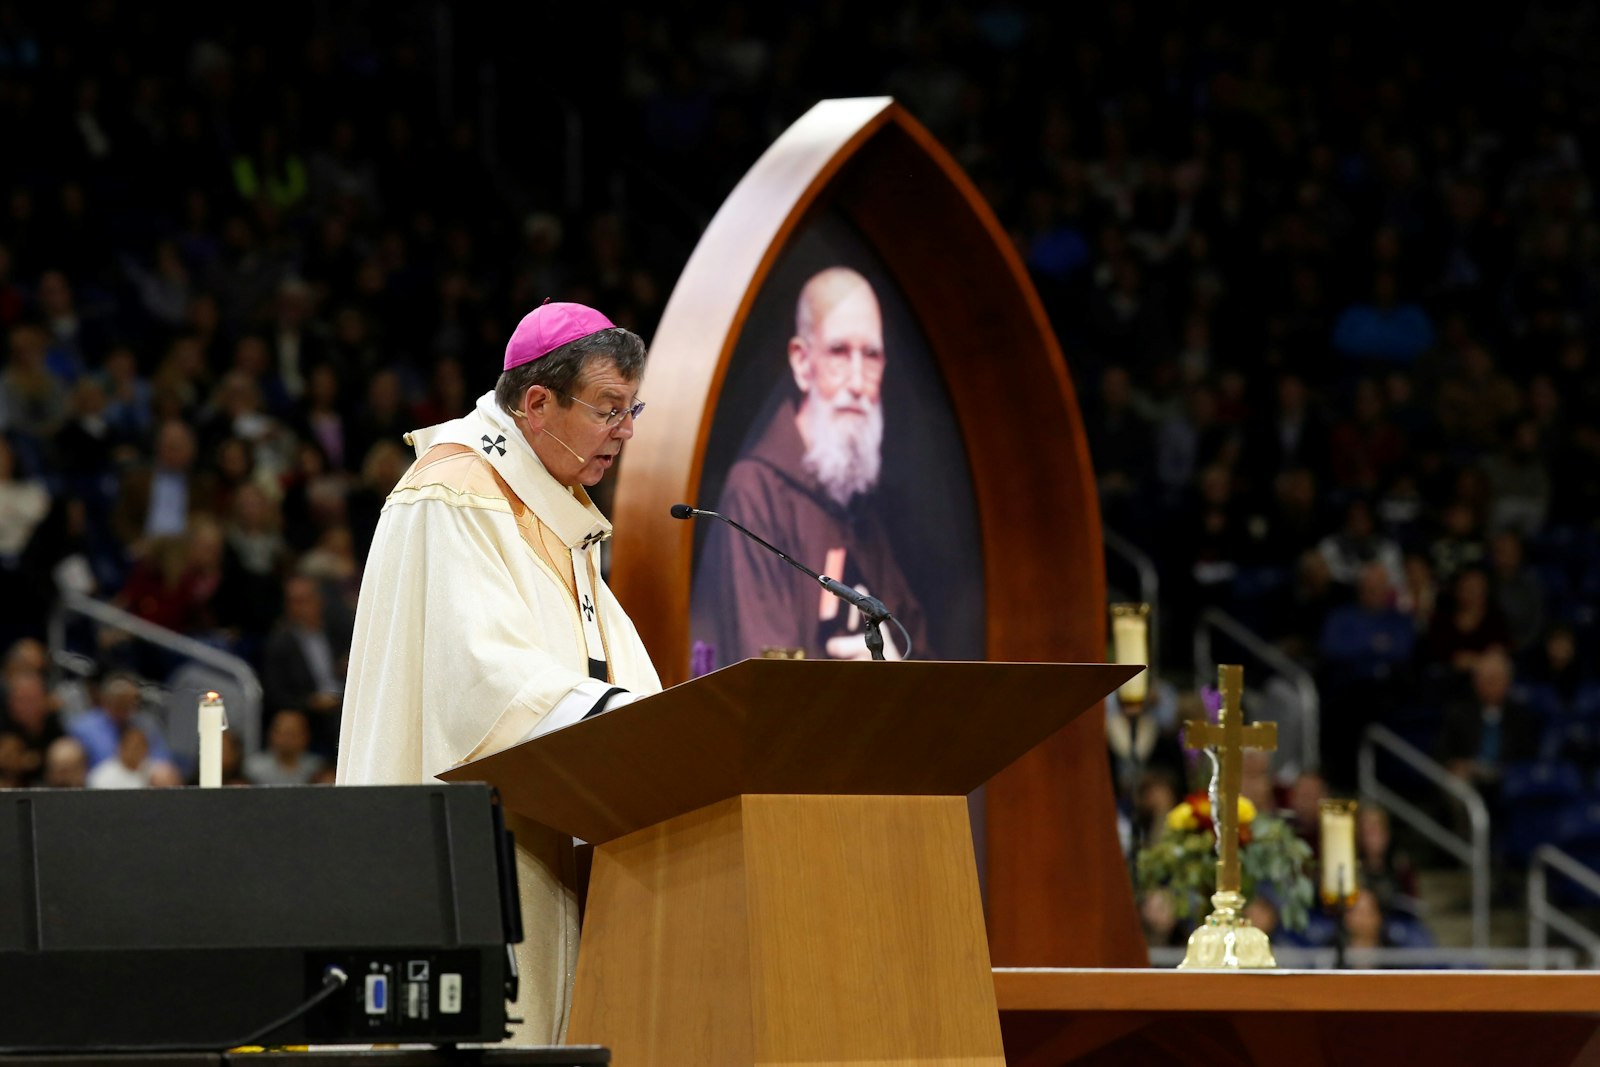 Archbishop Vigneron addresses the 65,000 people gathered at Detroit's Ford Field for the beatification Mass of Blessed Solanus Casey on Nov. 18, 2017. The beatification Mass took place exactly one year after the opening of Detroit's Synod 16. (Jeff Kowalsky | Detroit Catholic file photo)